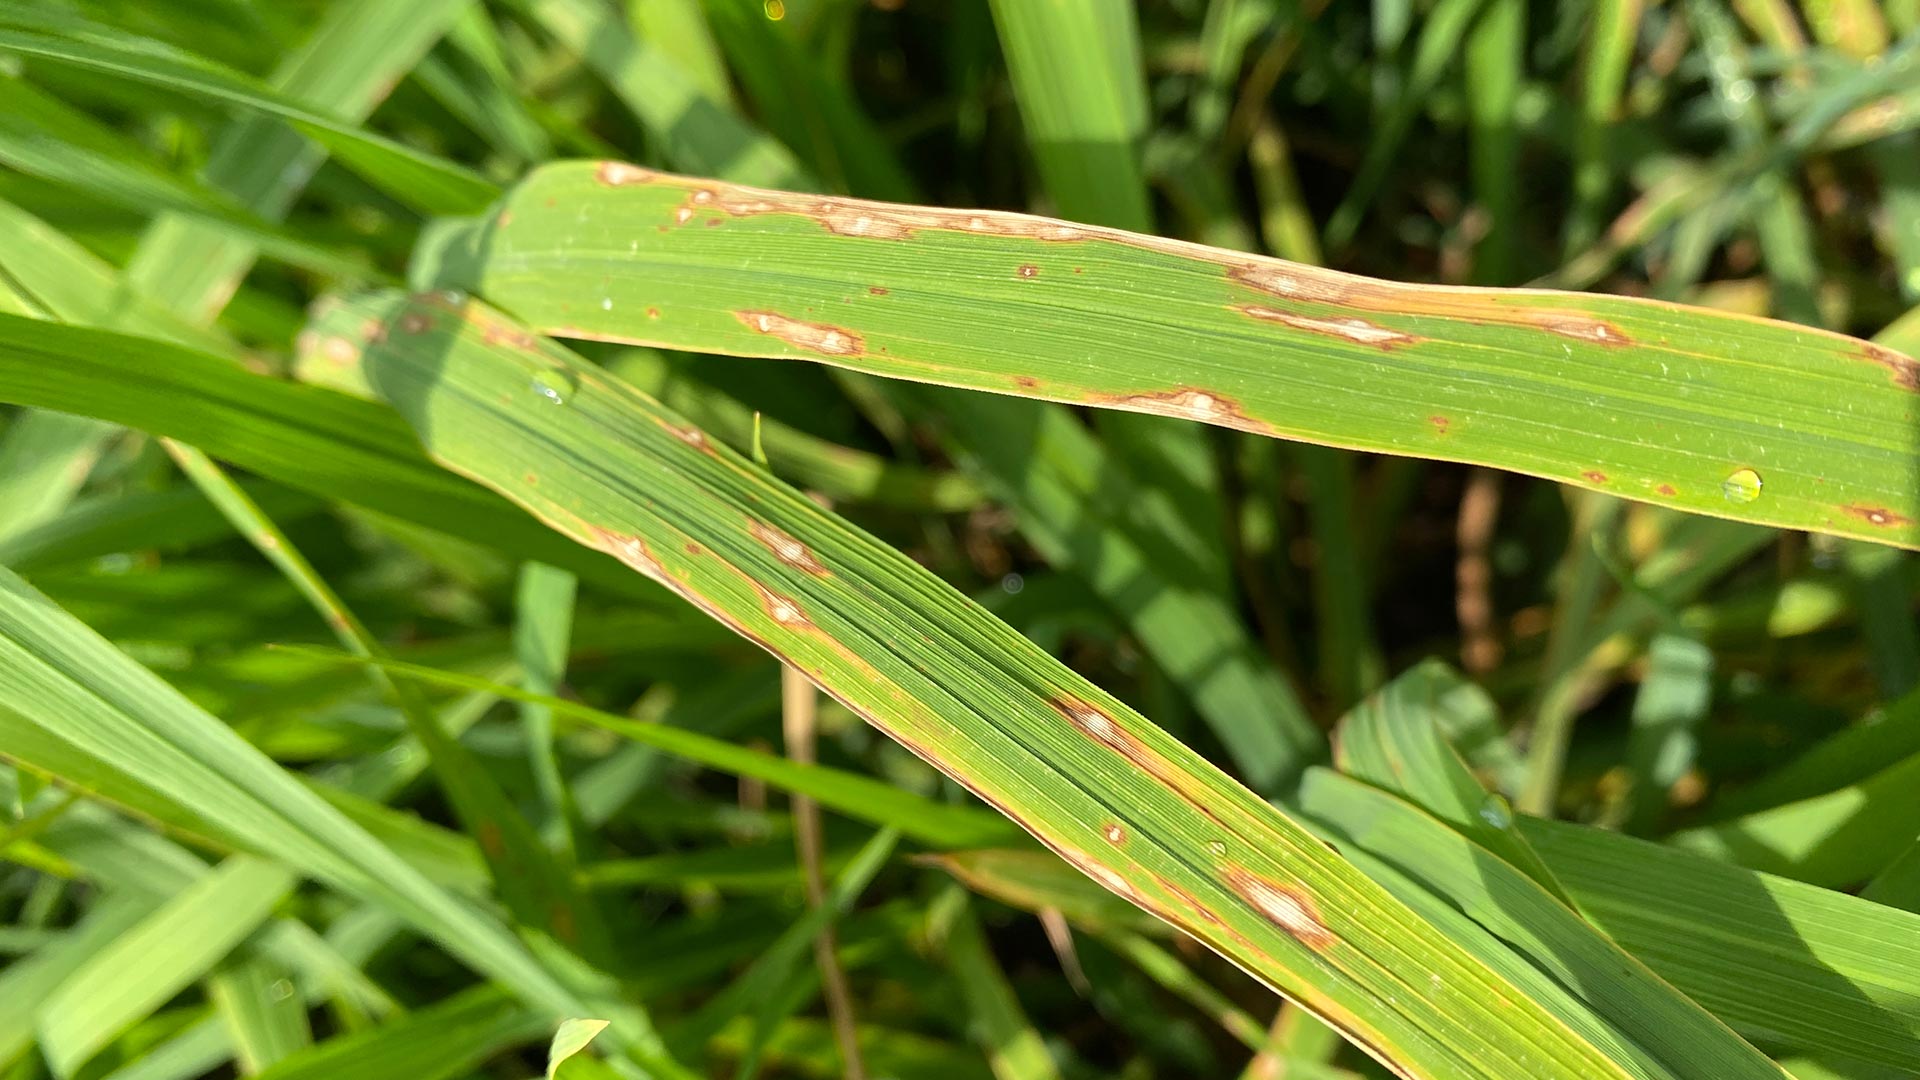 Leaf Spot or Dehydration - Which One Is Affecting Your Lawn?